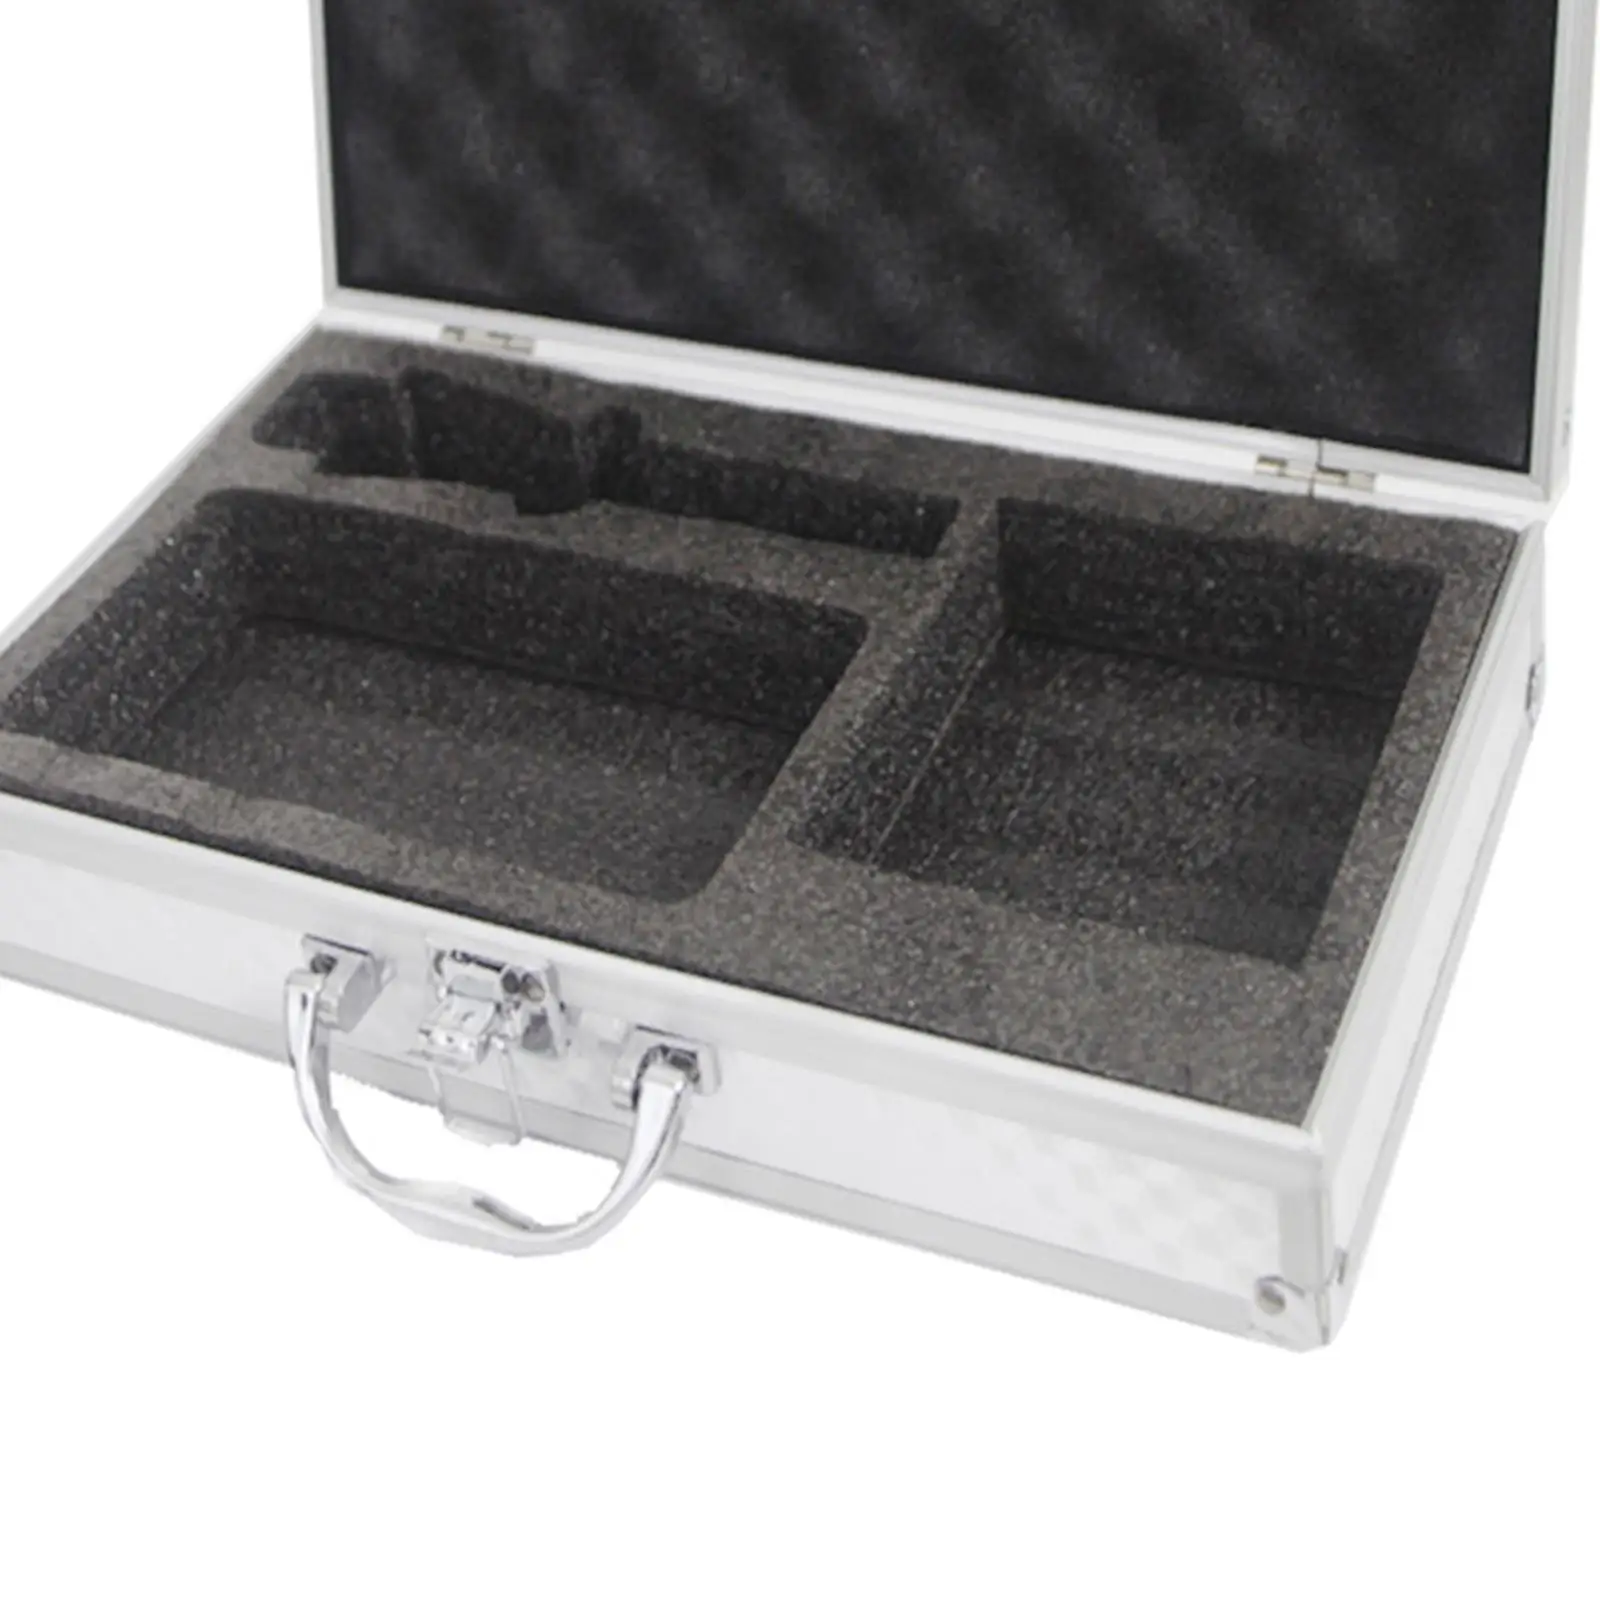 Portable Wireless Microphone Case with Sponge Lining Impact Resistant Mic Foam Case Hard Shell Case for Microphone Sound Card